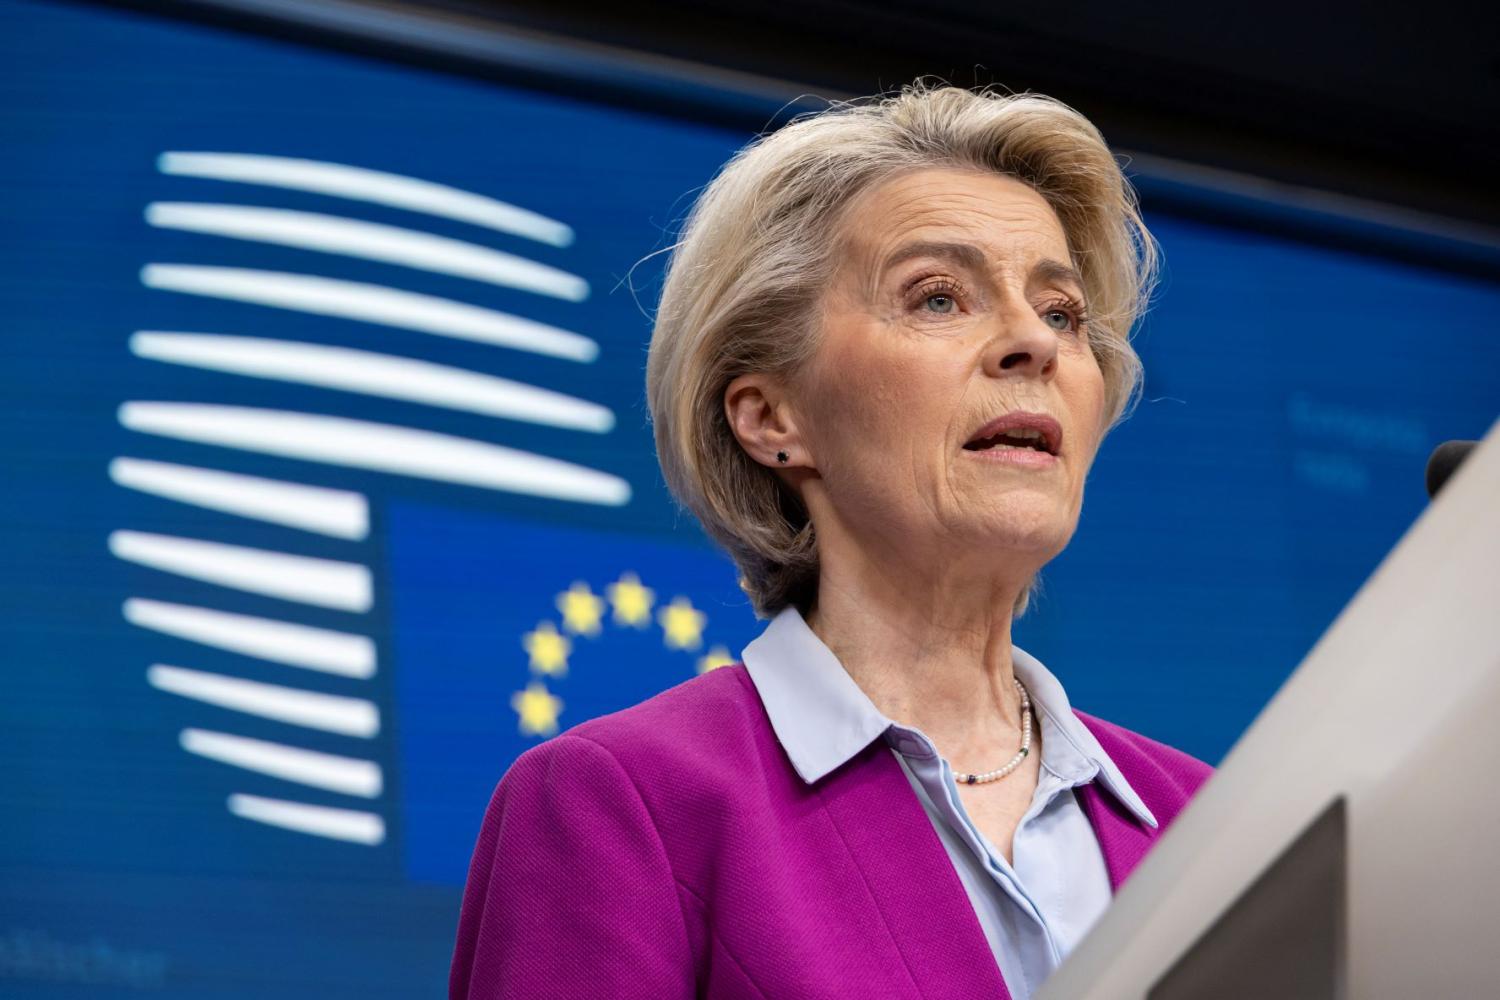 Ursula von der Leyen at a joint press conference briefing with Charles Michel President of the European Council.